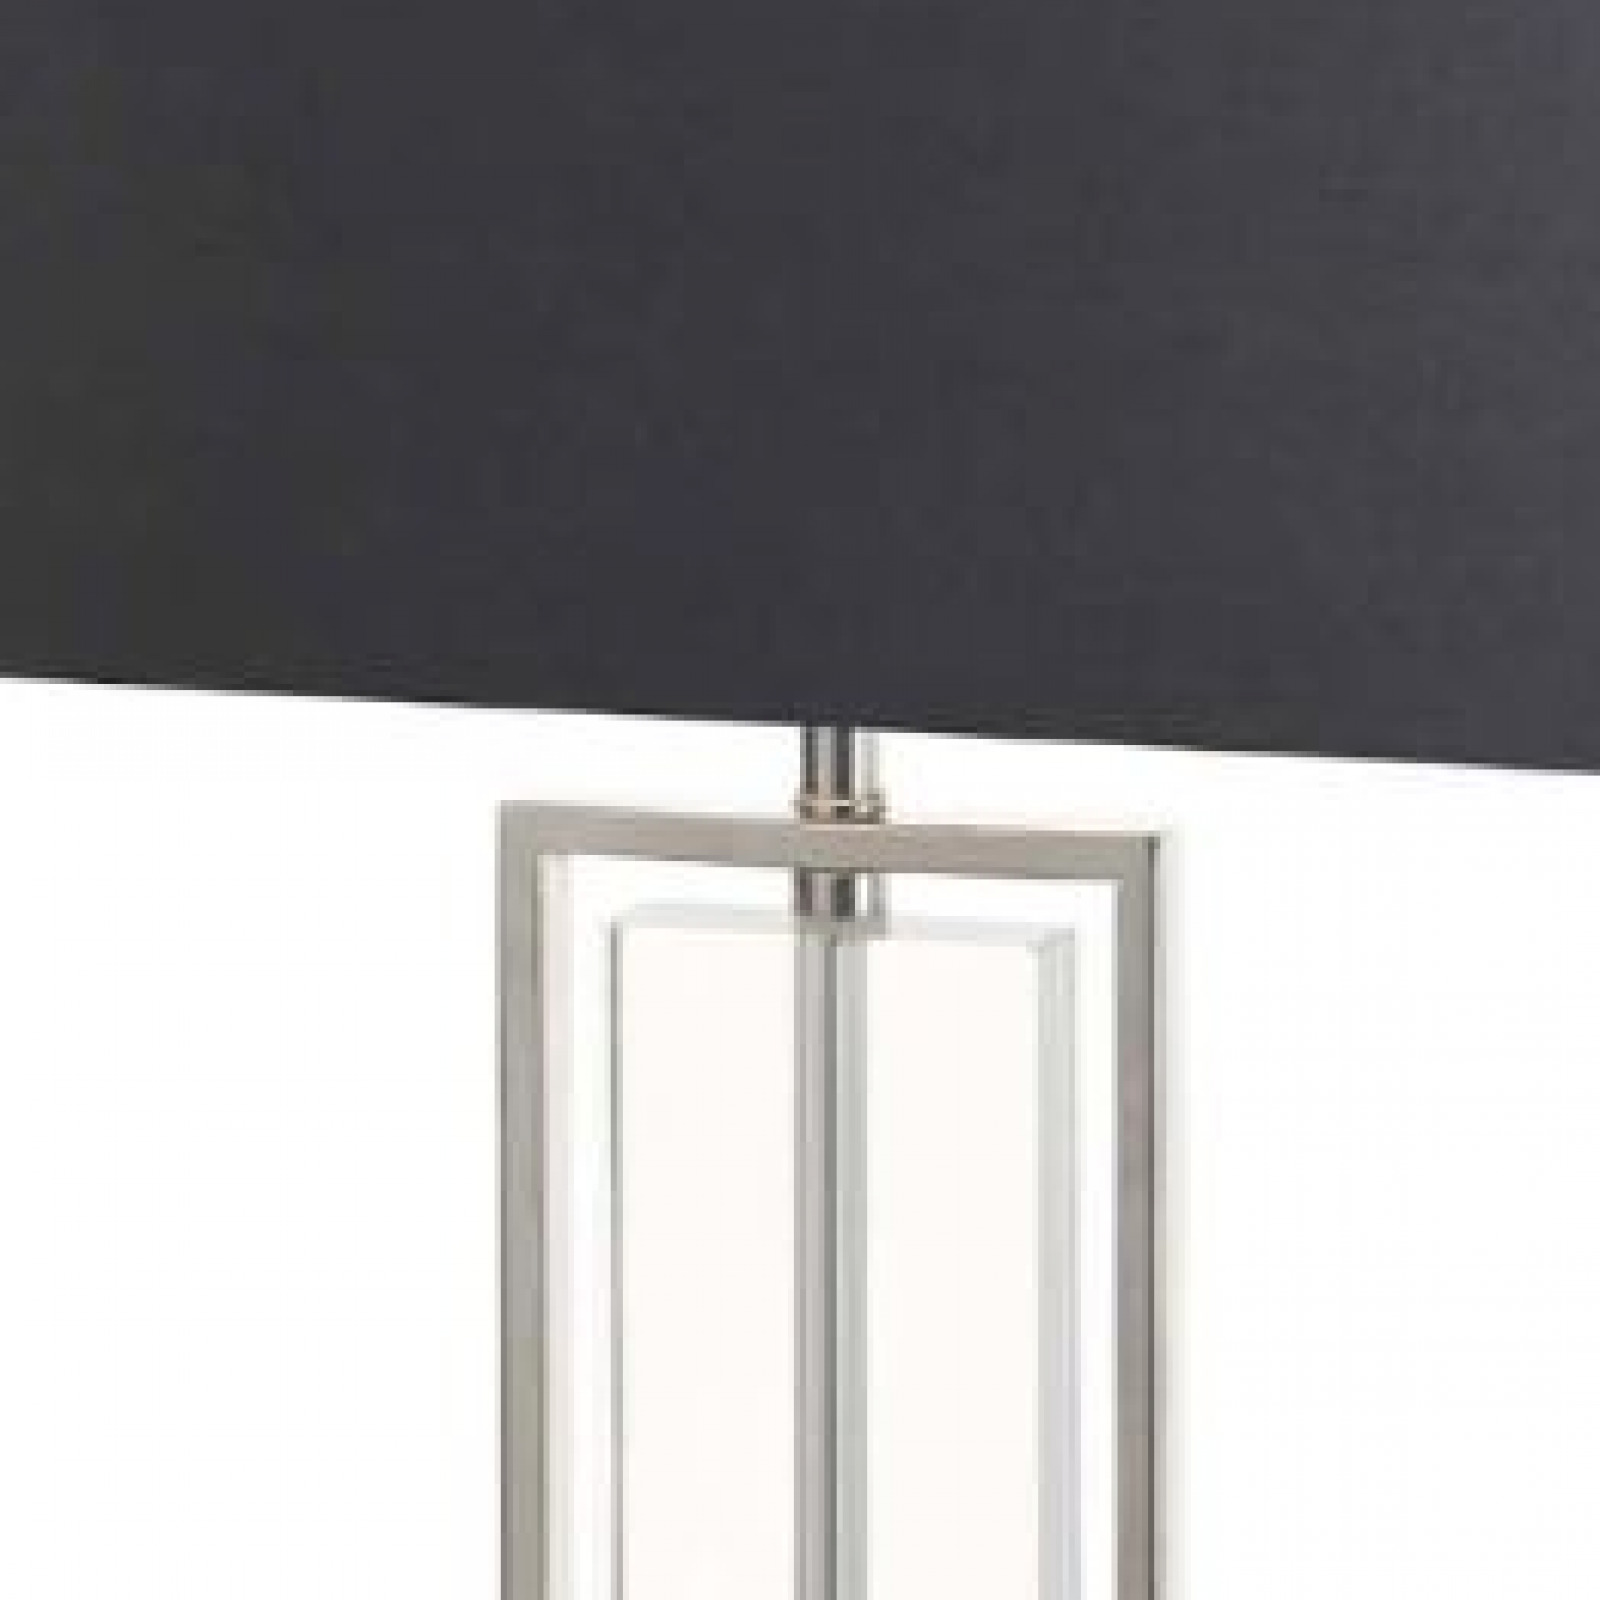 Beck table lamp